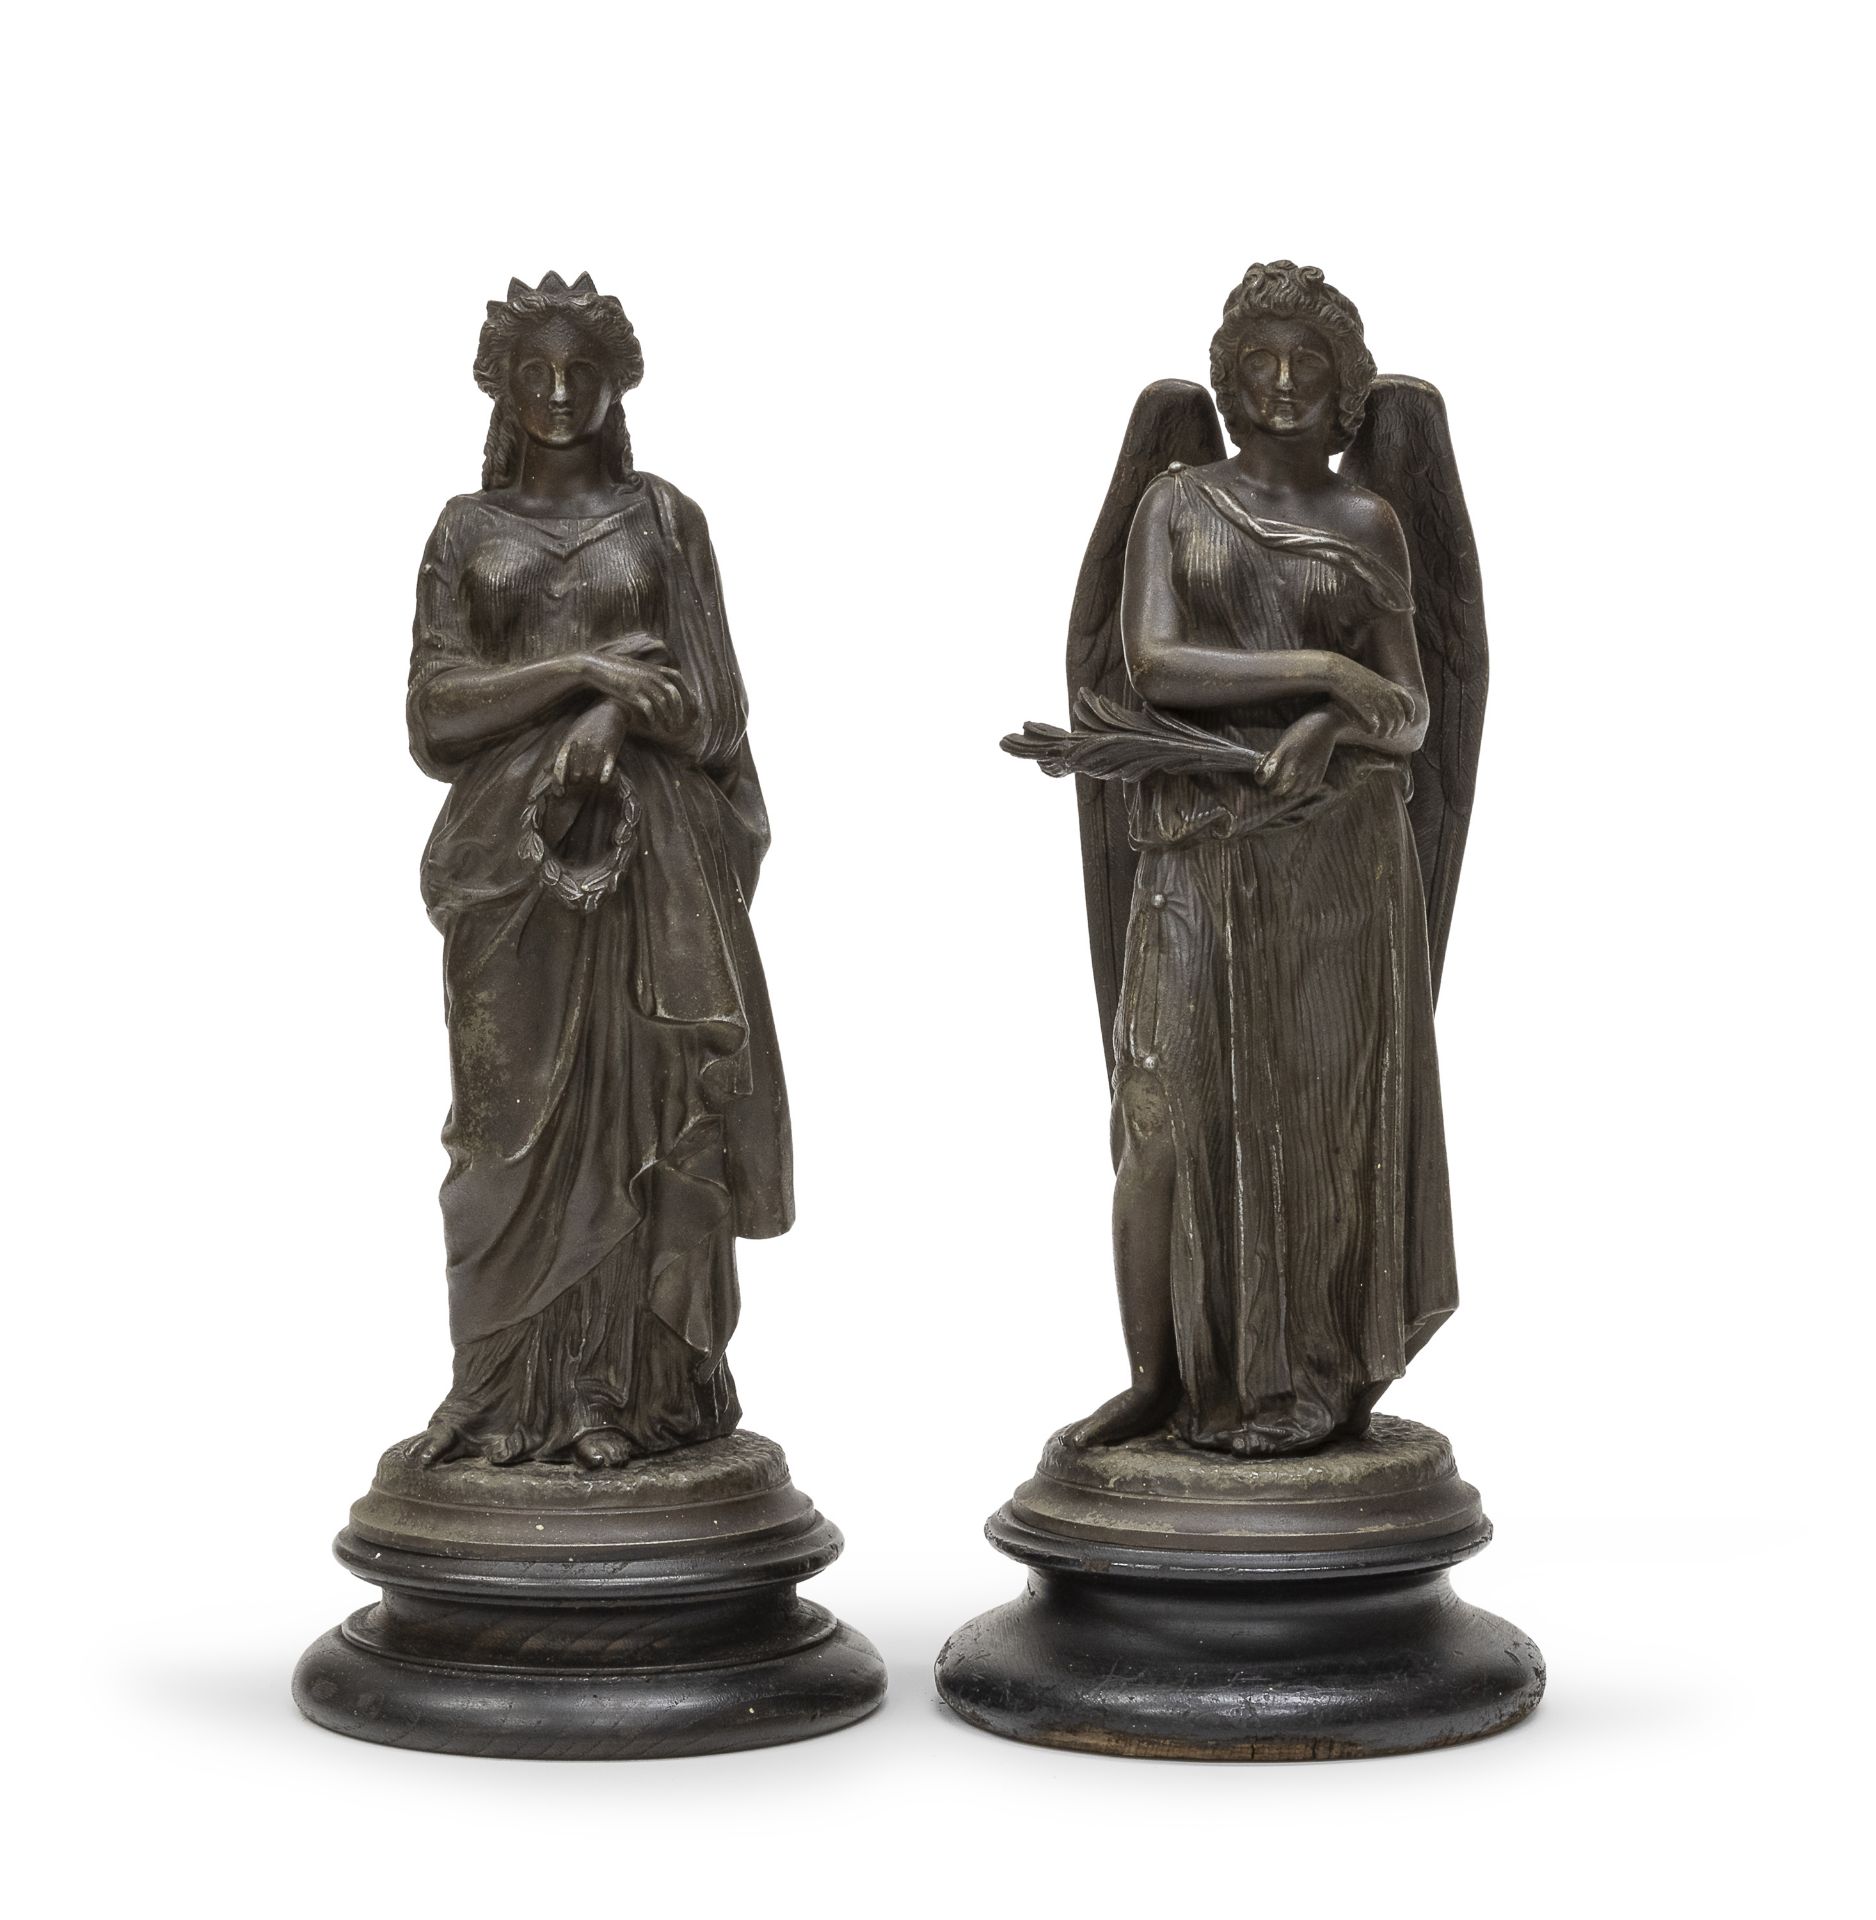 PAIR OF BURNISHED METAL SCULPTURES 19TH CENTURY